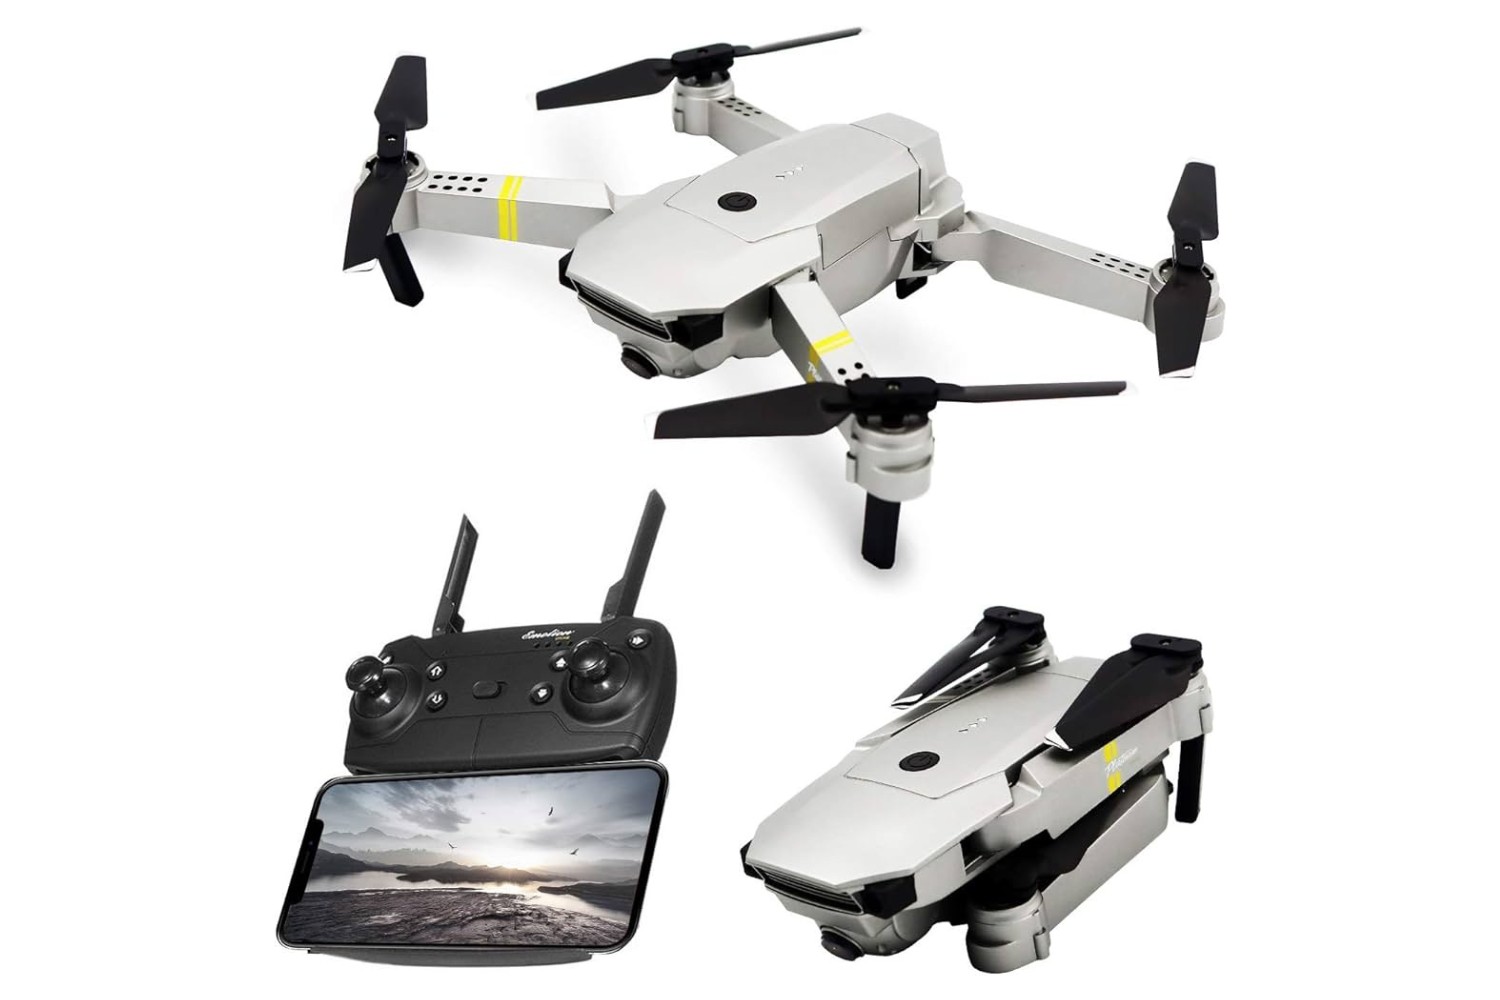 What Is The Difference Between A 30W And A 200W Camera Drone?